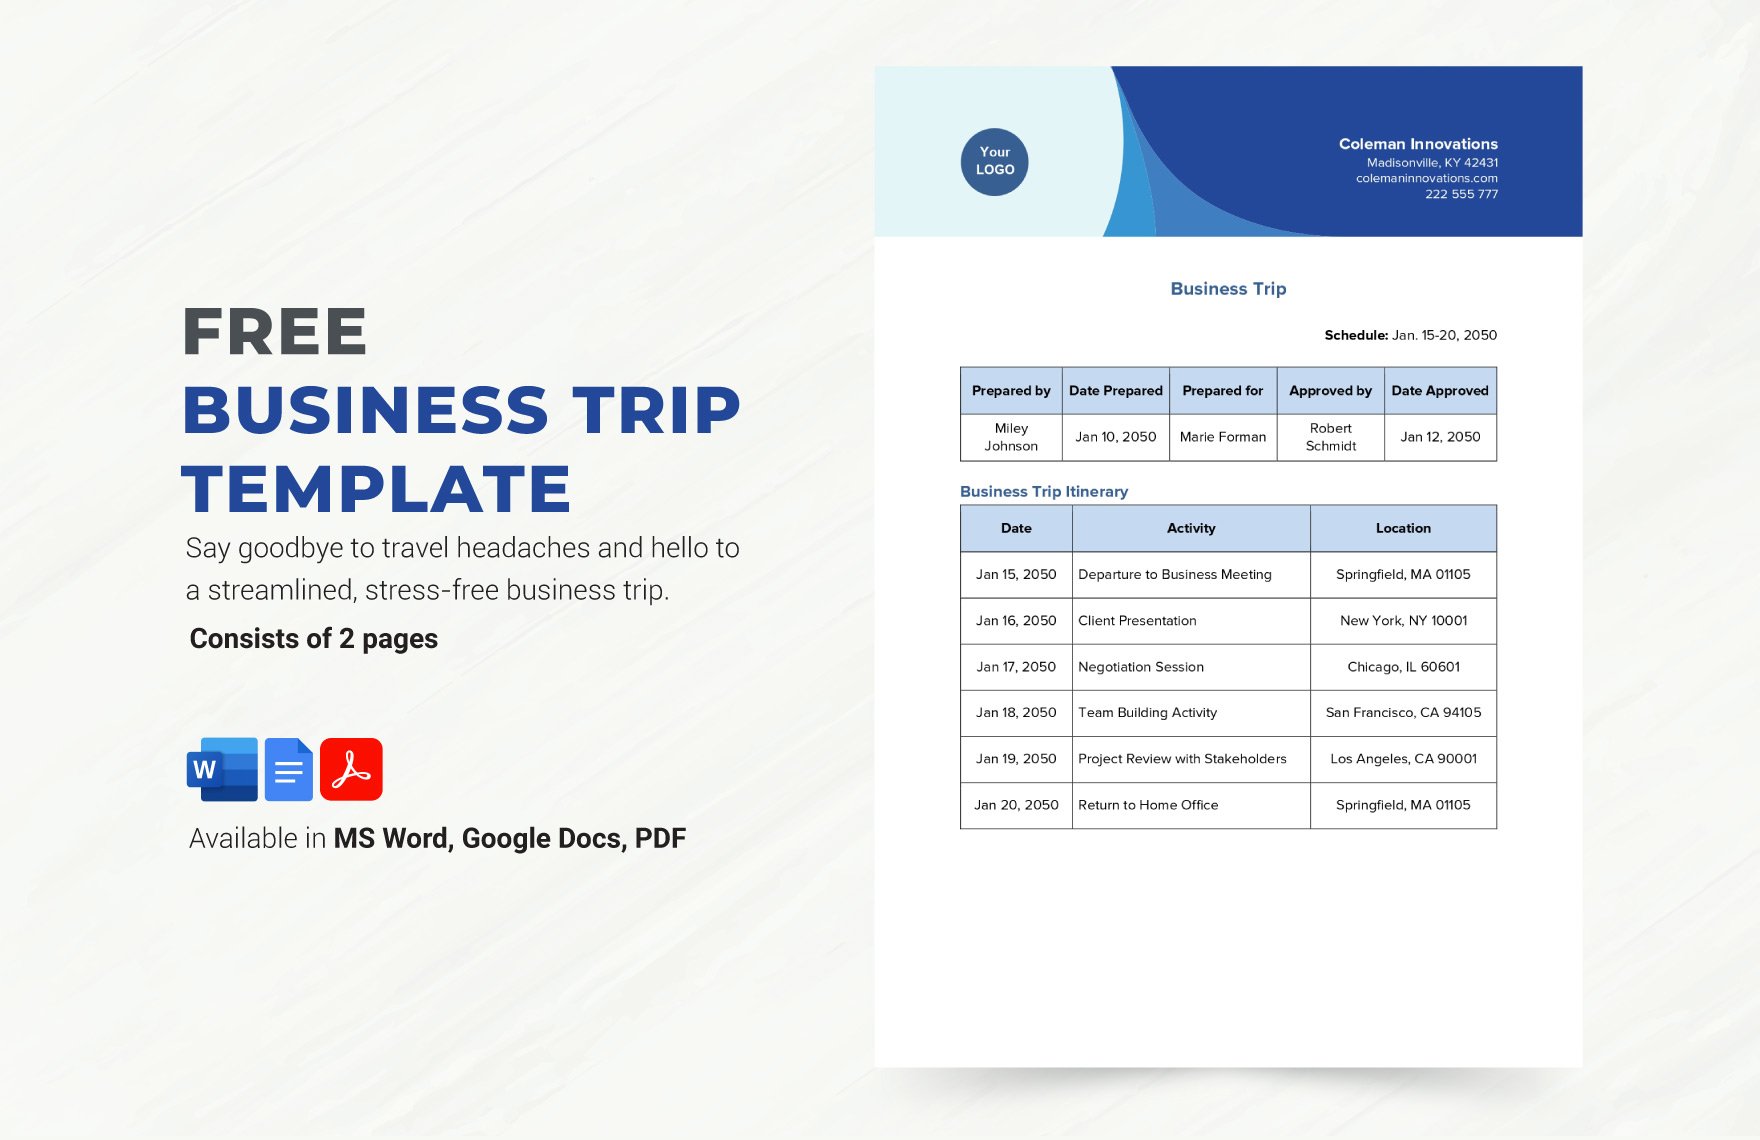 Free Business Trip Template in Word, Google Docs, PDF